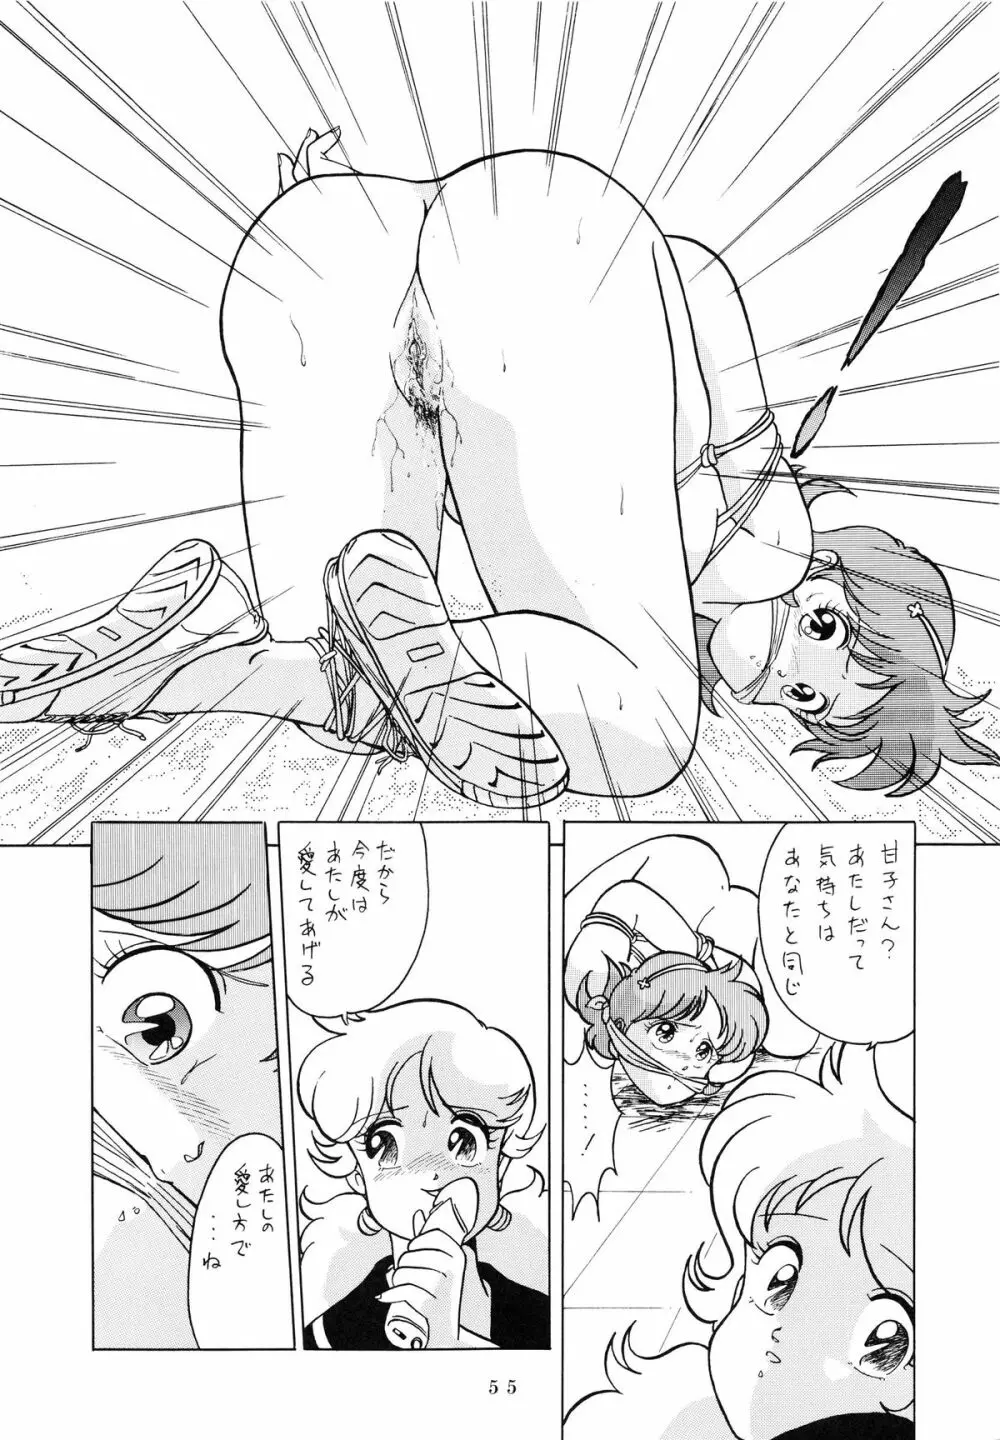 RAINBOW CHASER TENT HOUSE Vol.XI Page.55